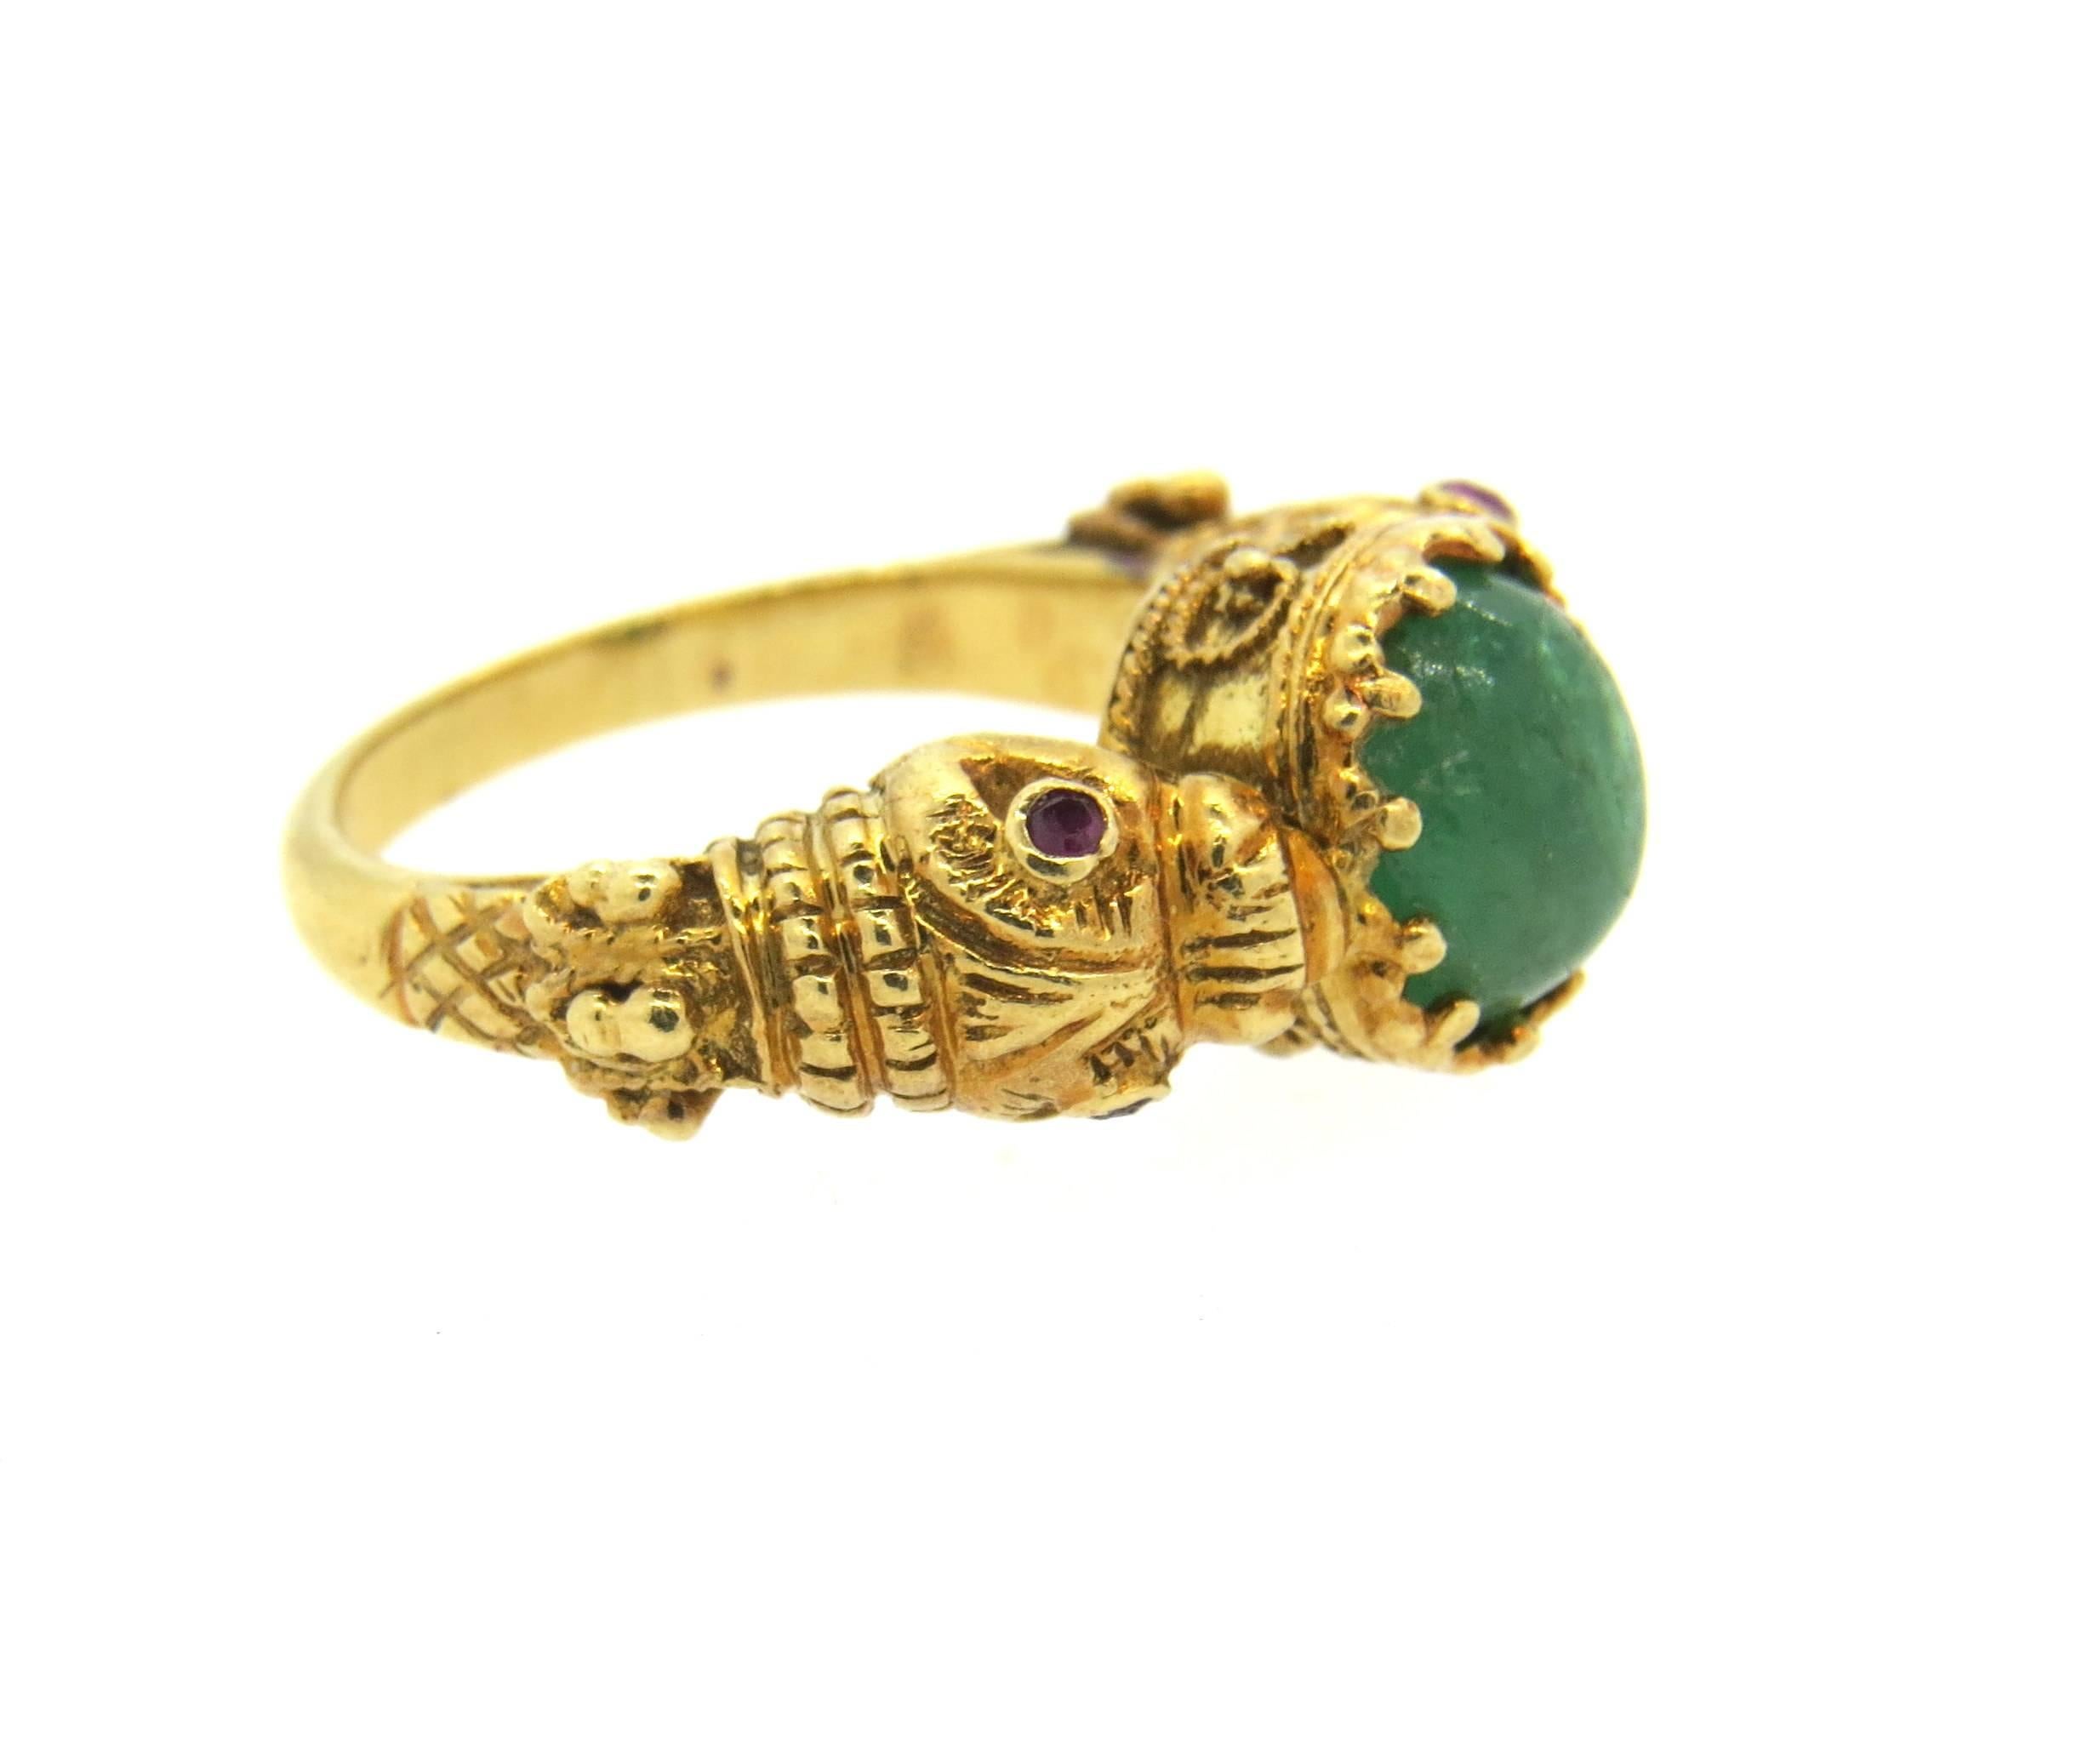 18k yellow gold ring, crafted by Zolotas, set with 8.7mm x 7.5mm emerald as a centerpiece, surrounded with four rubies. Ring is a size 5 1/2, ring top is 9.7mm wide.   Marked: 750, Zolotas mark. Weight of the piece - 10.4 grams